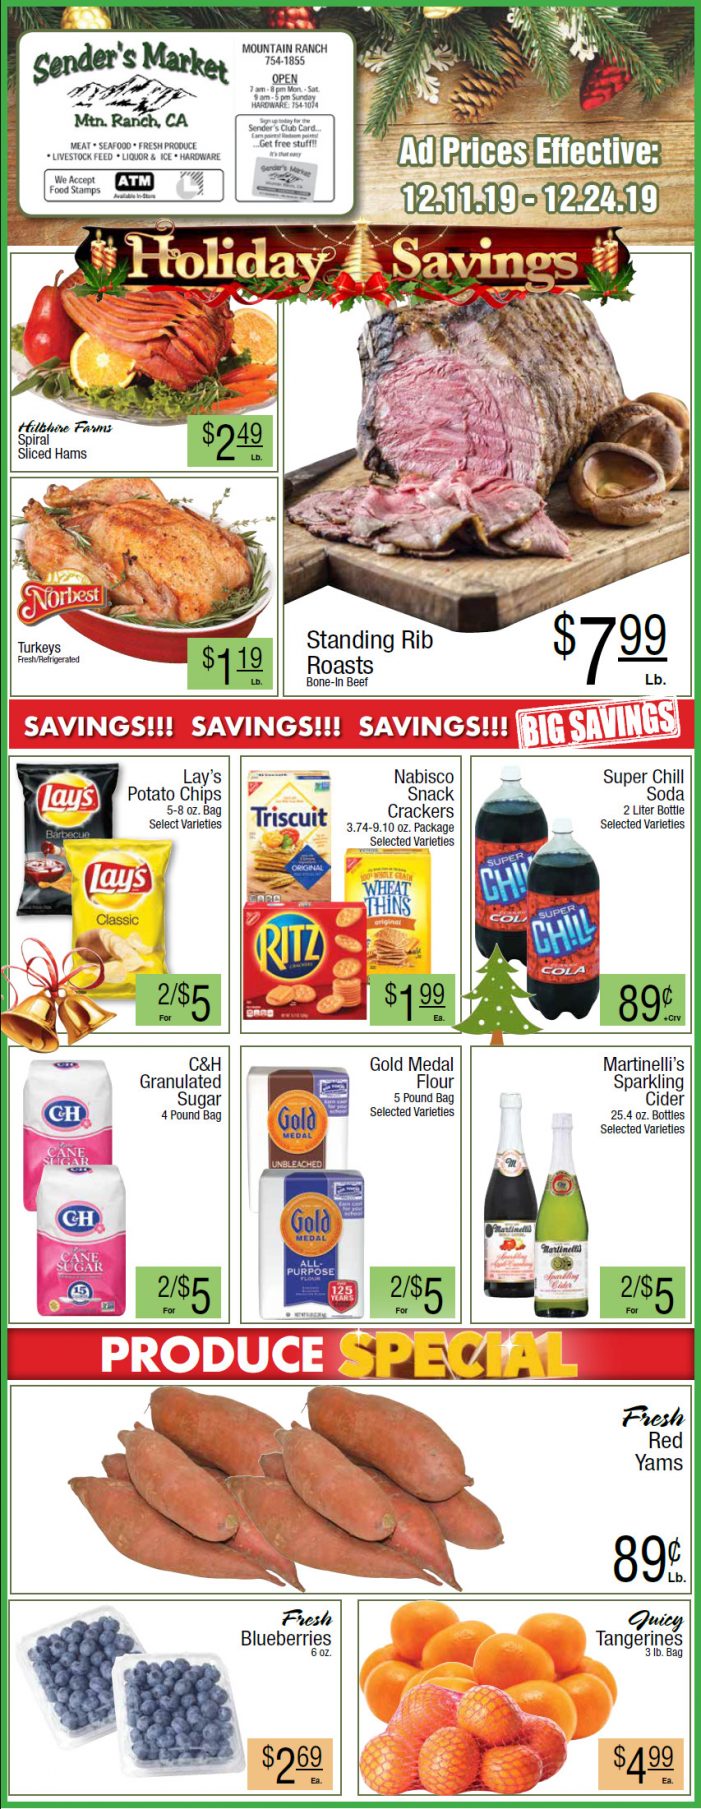 Sender’s Market’s Grocery Ad & Grocery Specials Through December 24th